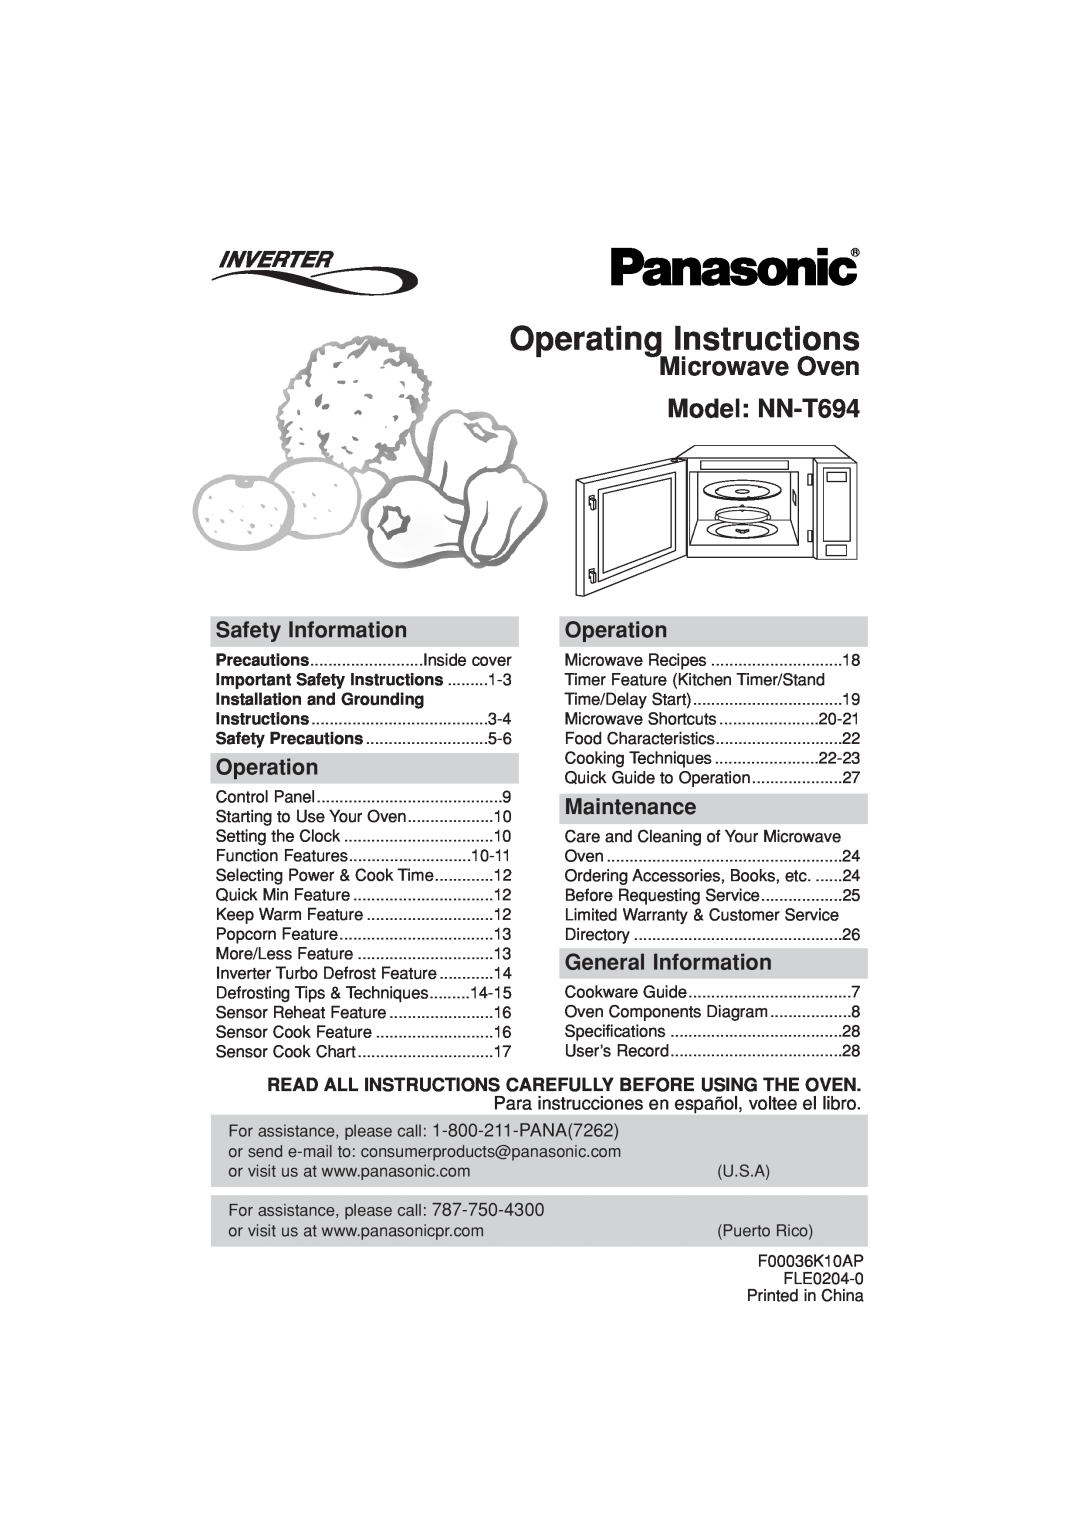 Panasonic operating instructions Operating Instructions, Microwave Oven Model NN-T694, Safety Information, Operation 